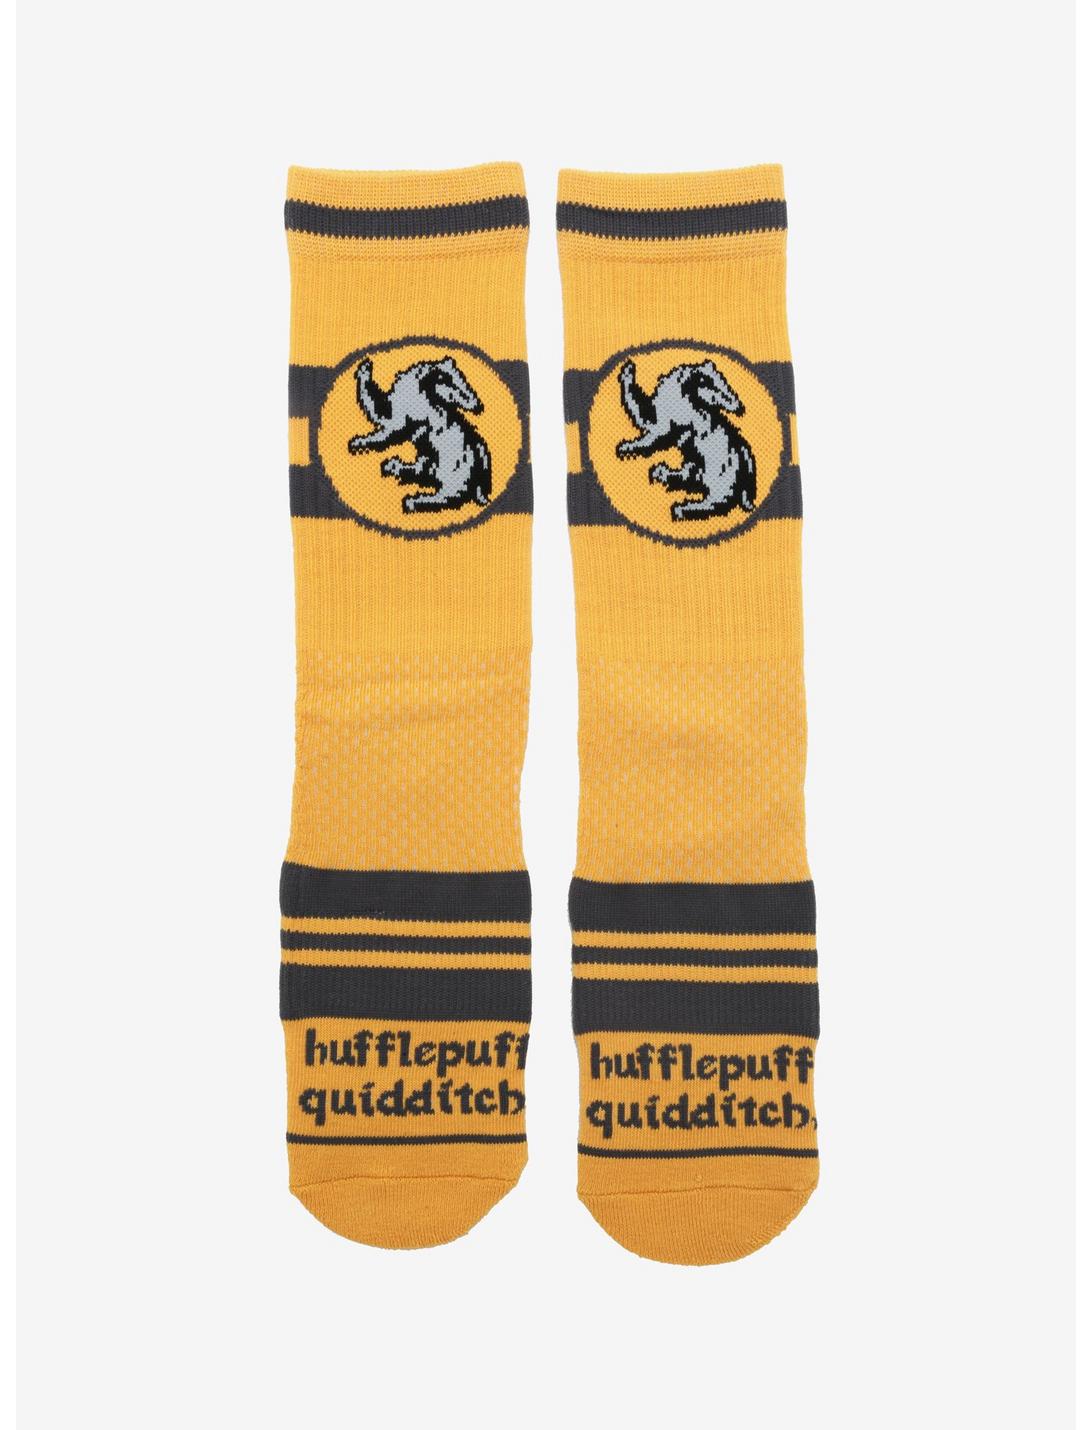 Harry Potter Hufflepuff Quidditch Mesh Crew Socks - BoxLunch Exclusive, , hi-res